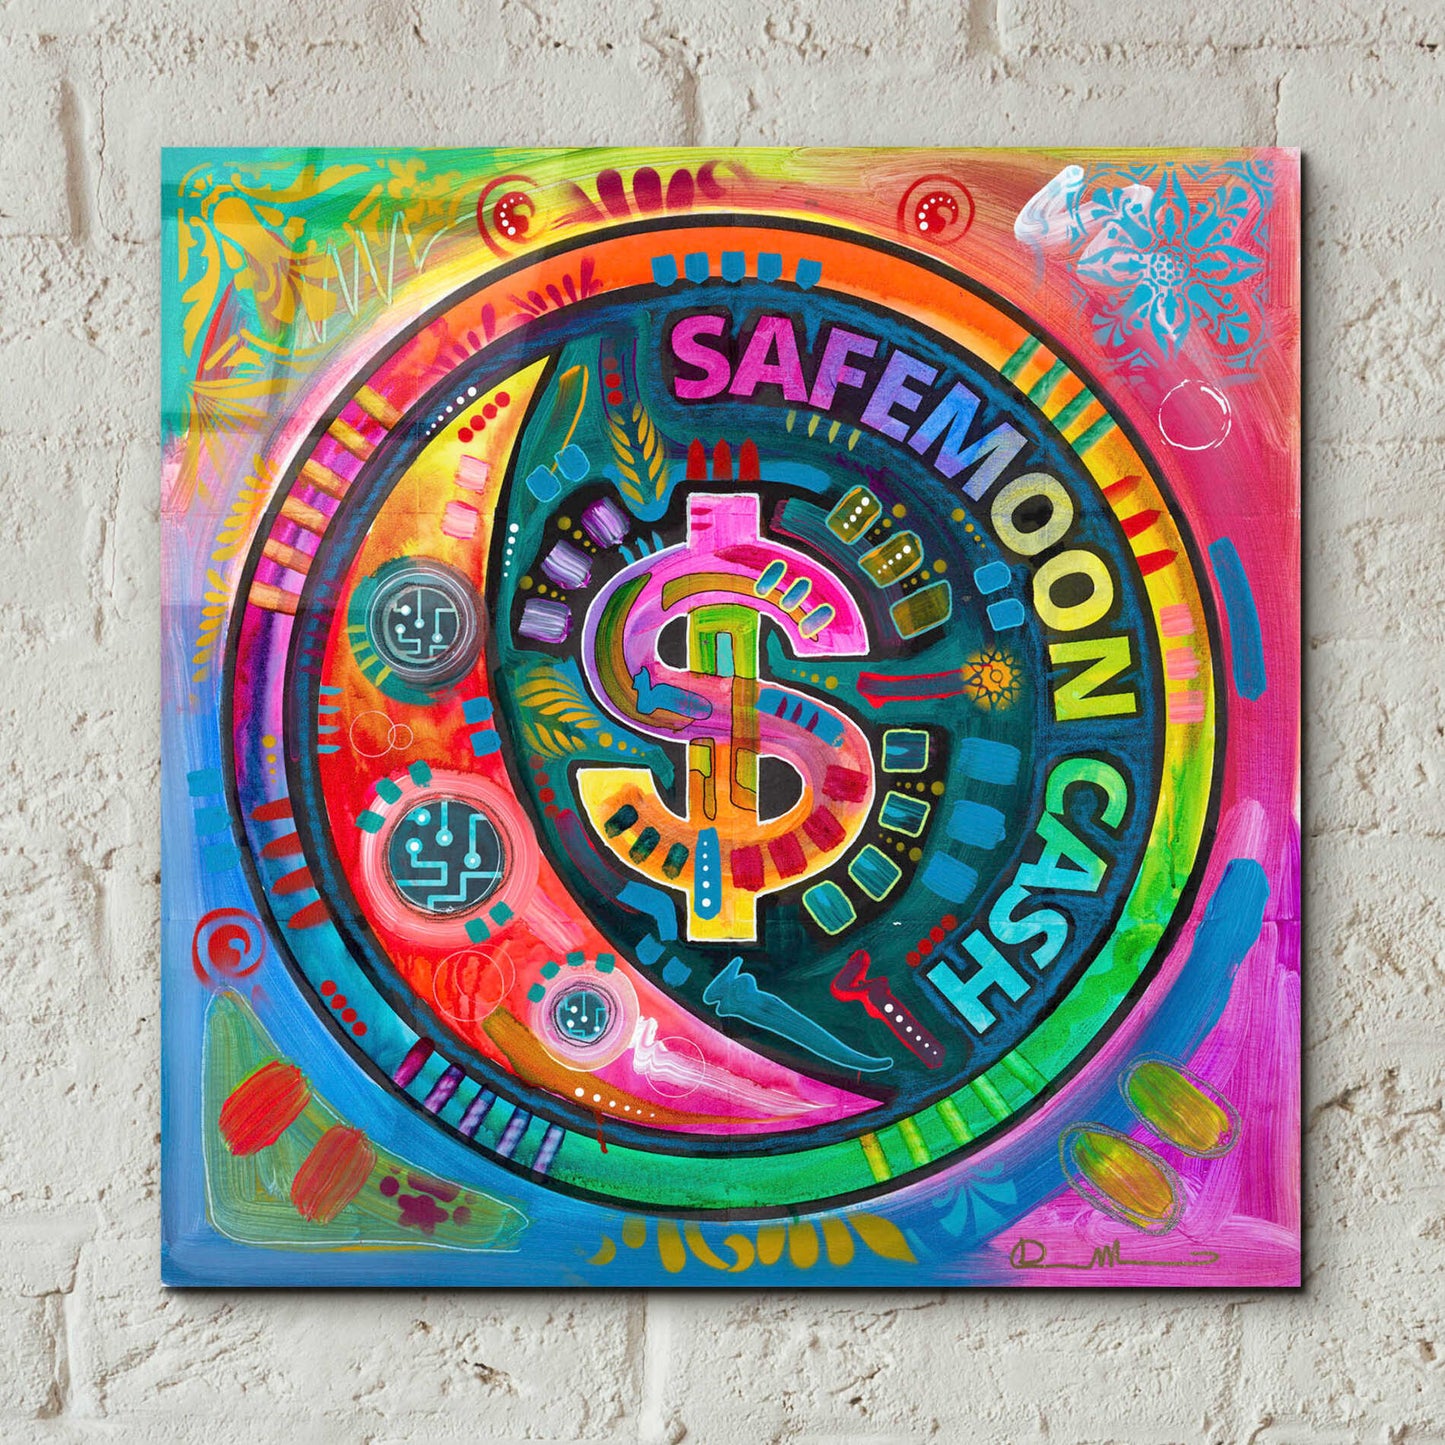 Epic Art 'Safemoon Cash' by Dean Russo, Acrylic Glass Wall Art,12x12